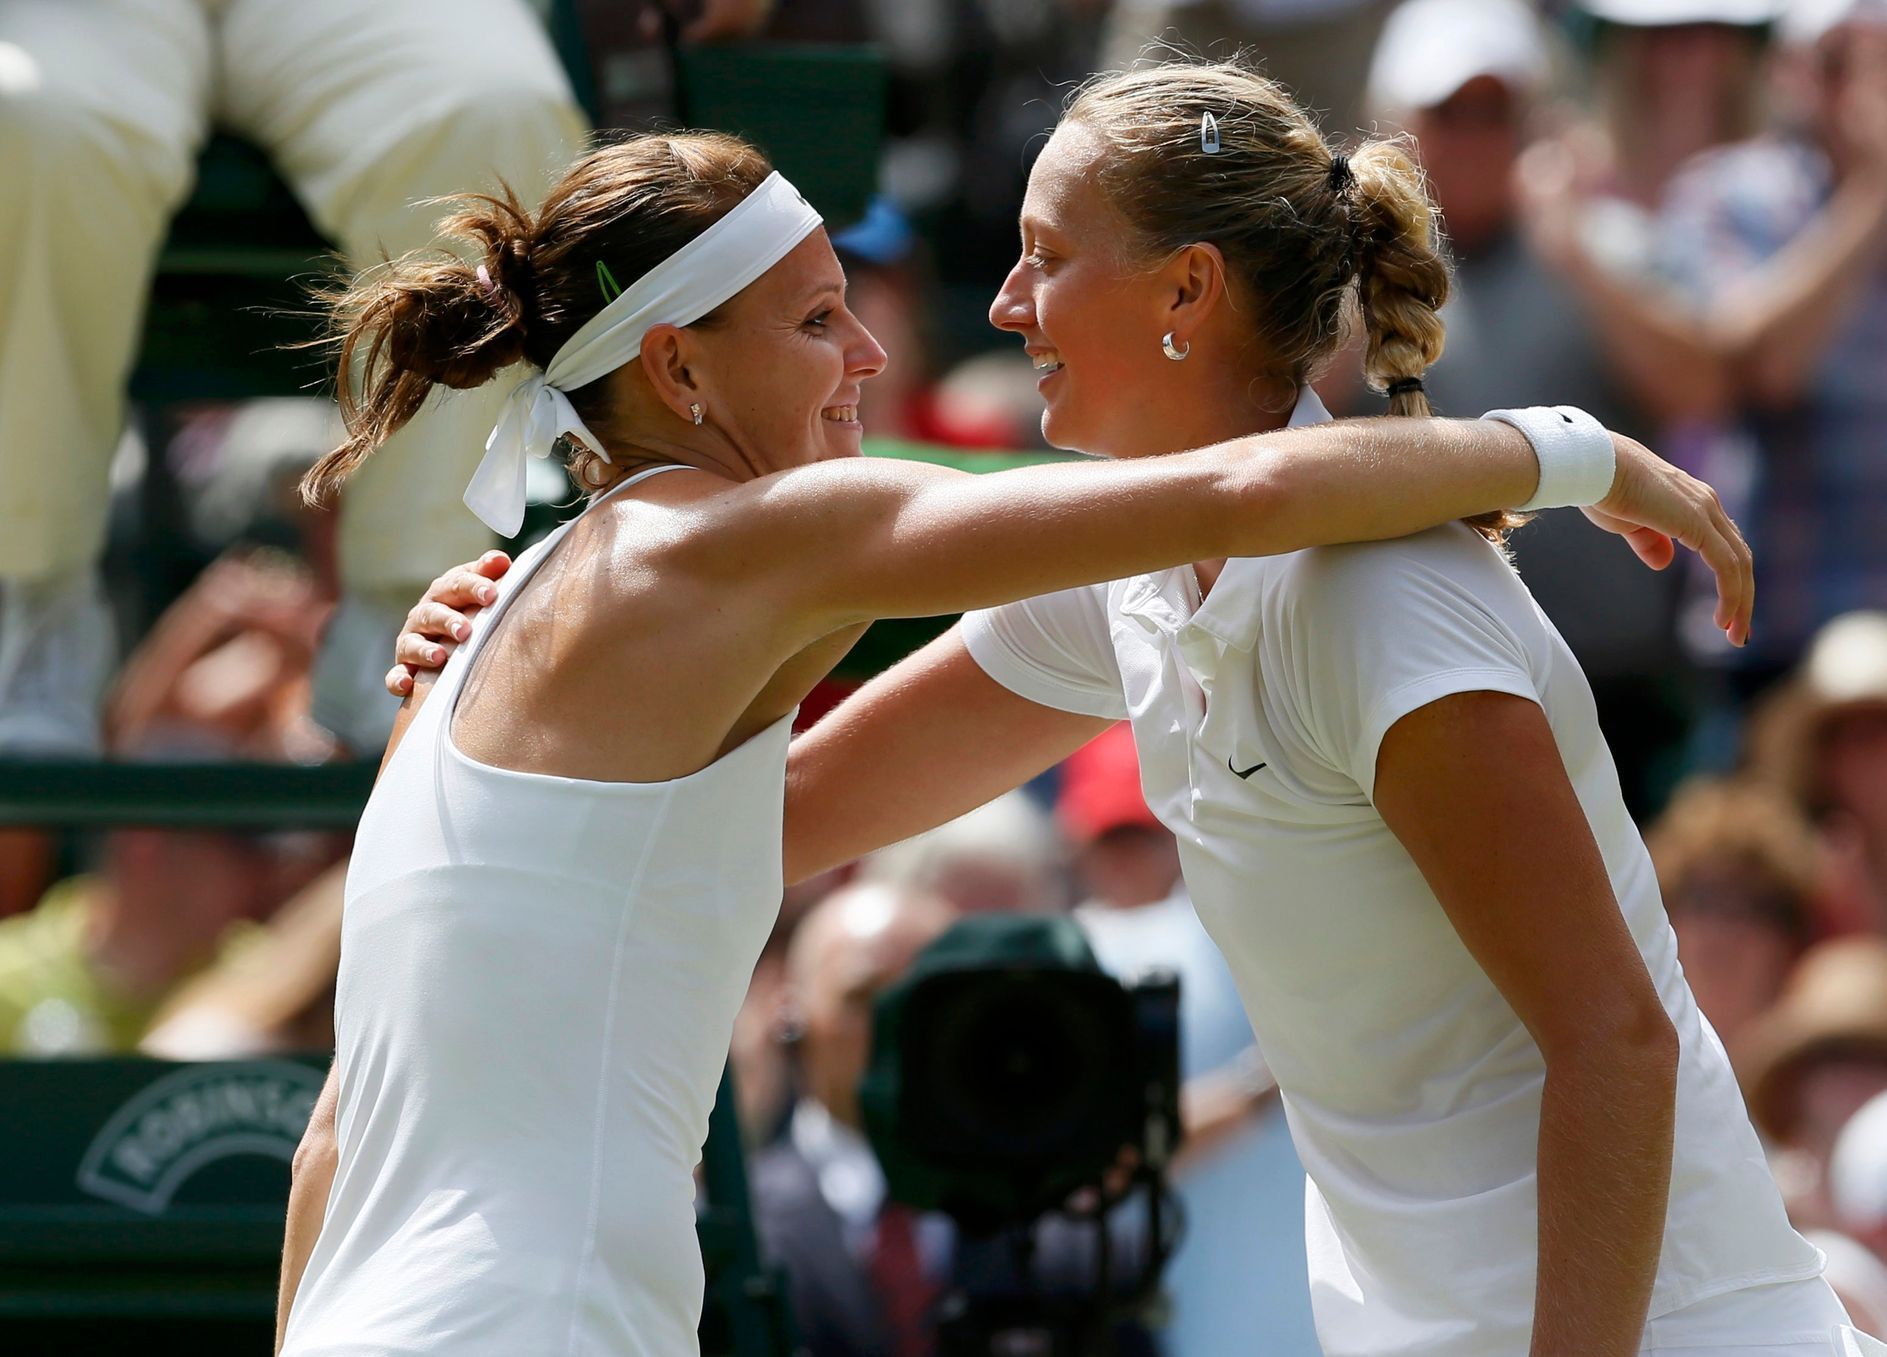 Petra Kvitova of the Czech Republic embraces Lucie Safarova of the Czech Republic after defeating her in their women's singles semi-final tennis match at the Wimbledon Tennis Championships, in London